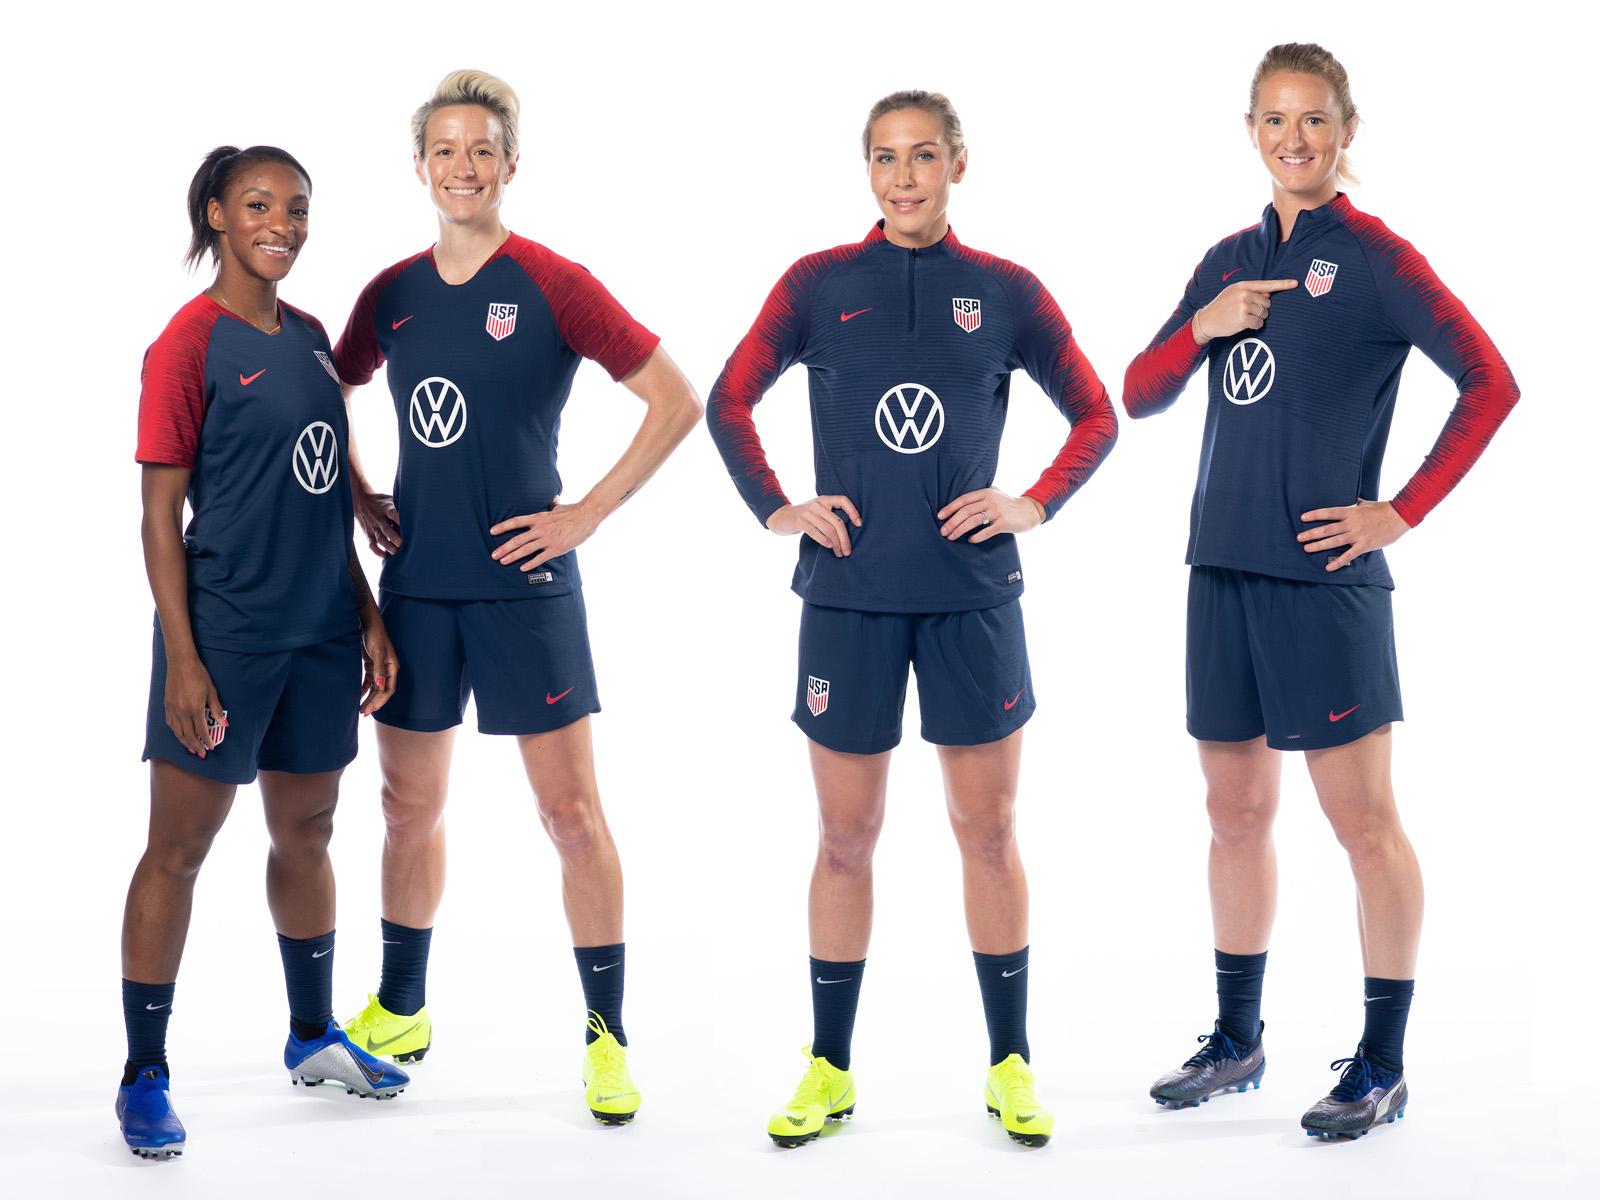 Volkswagen kicks off with U.S. Soccer, aiming to become America's